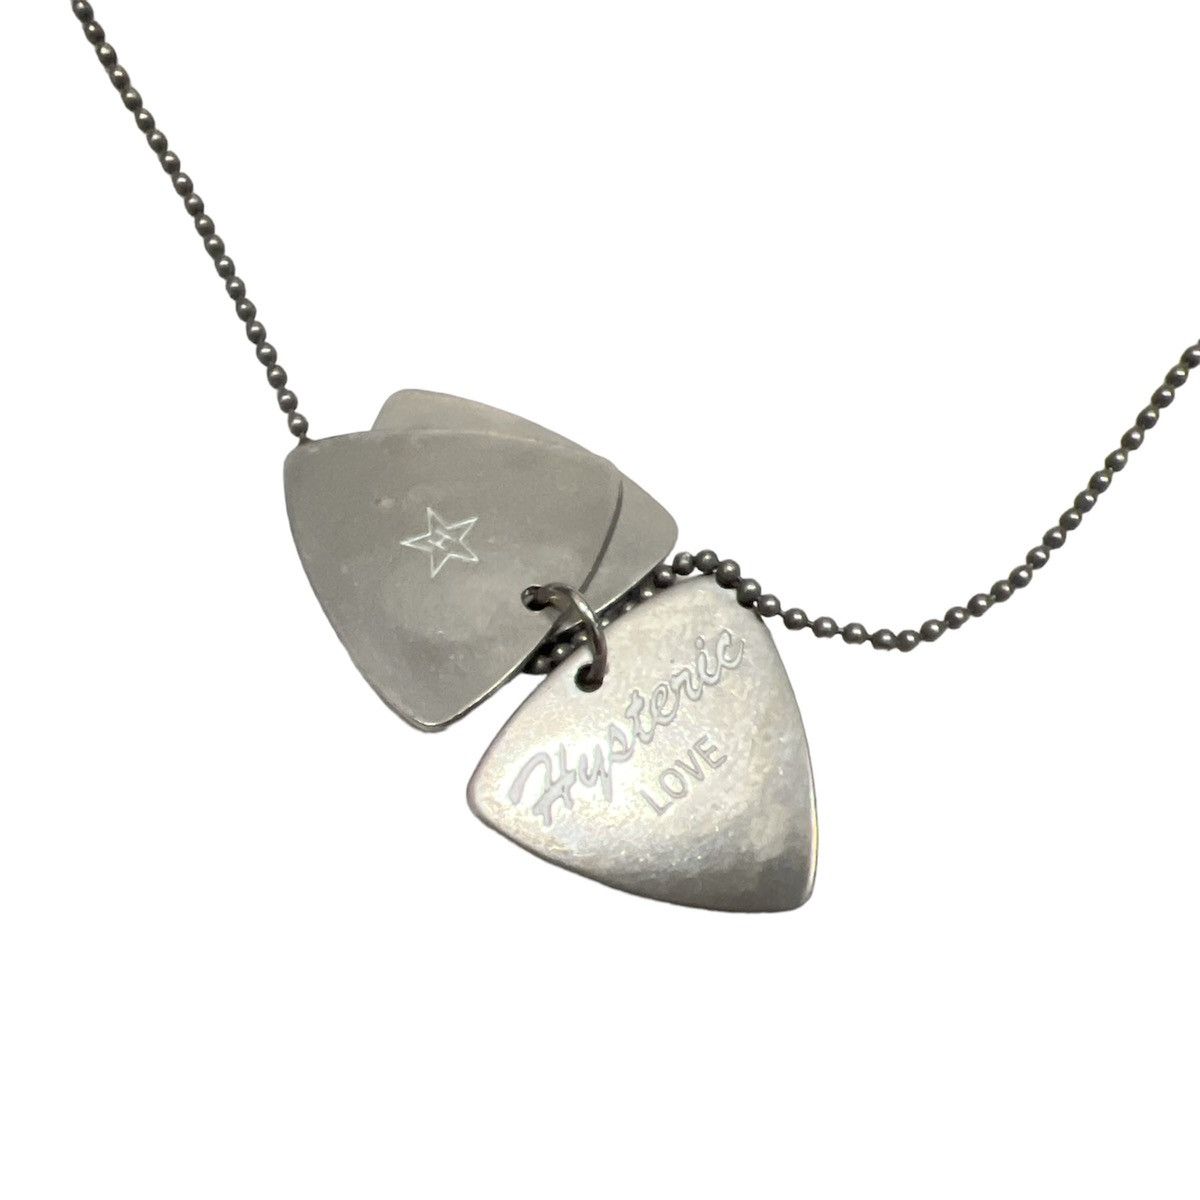 Hysteric Glamour silver guitar pick necklace - 5